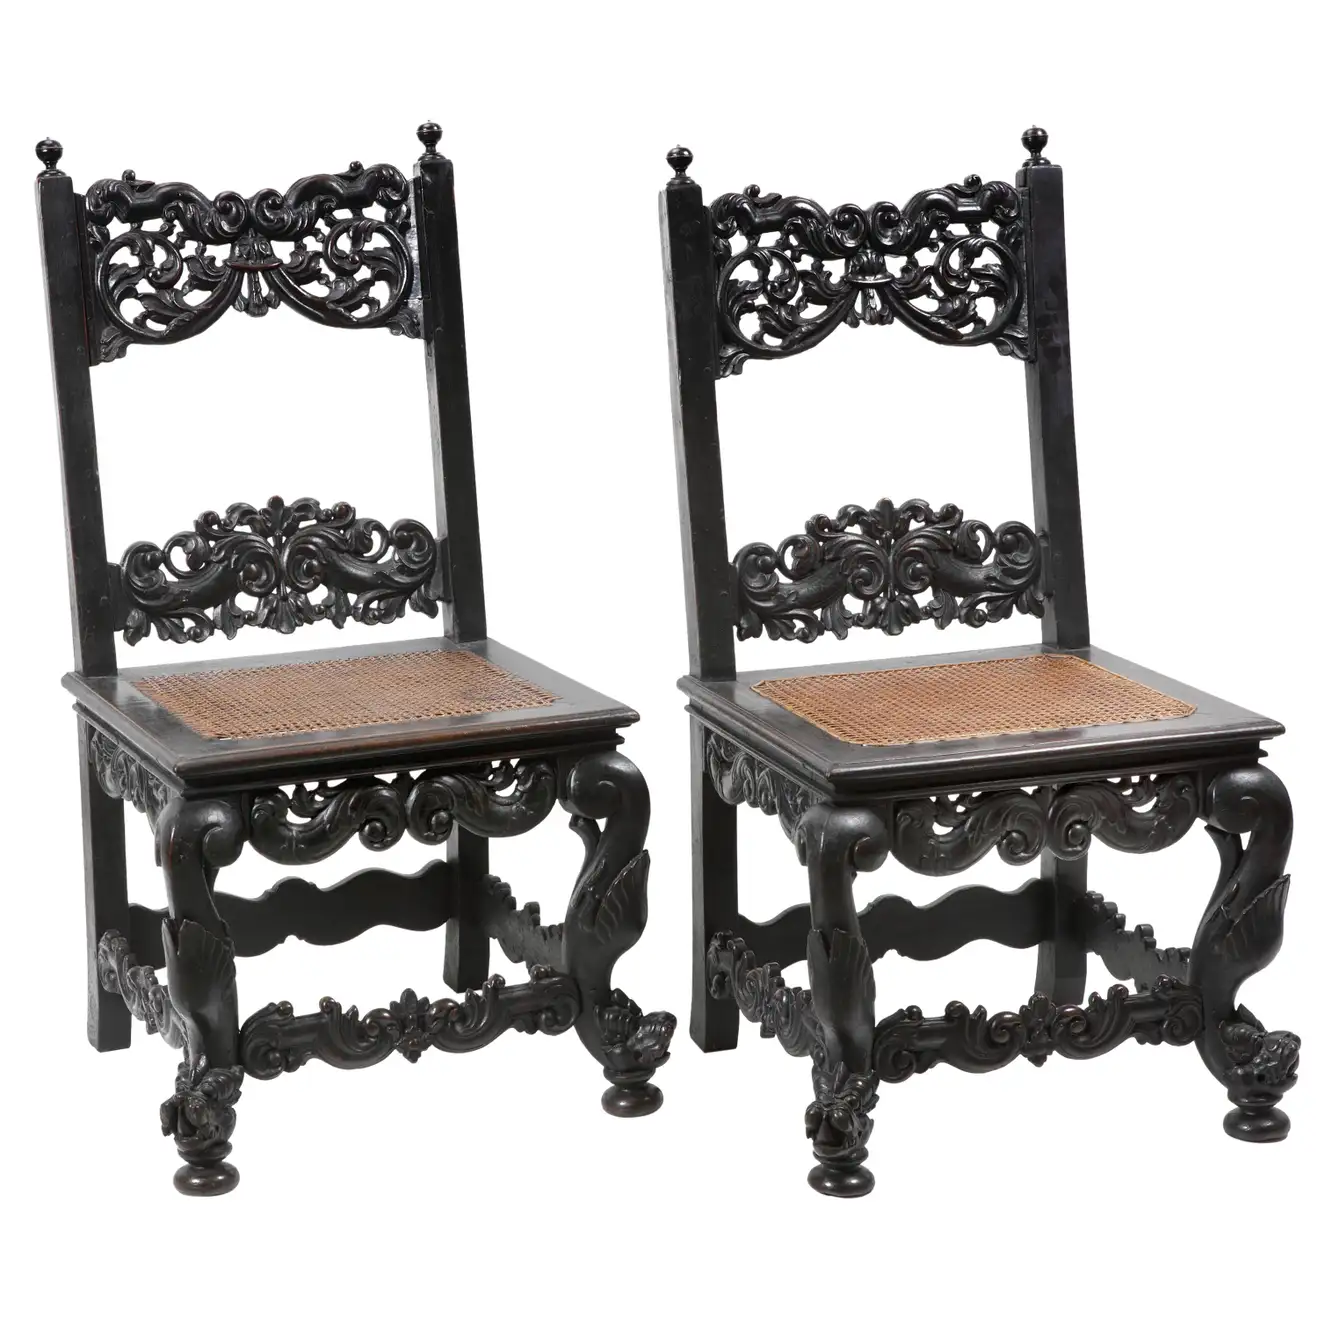 Chair from the early colonial period